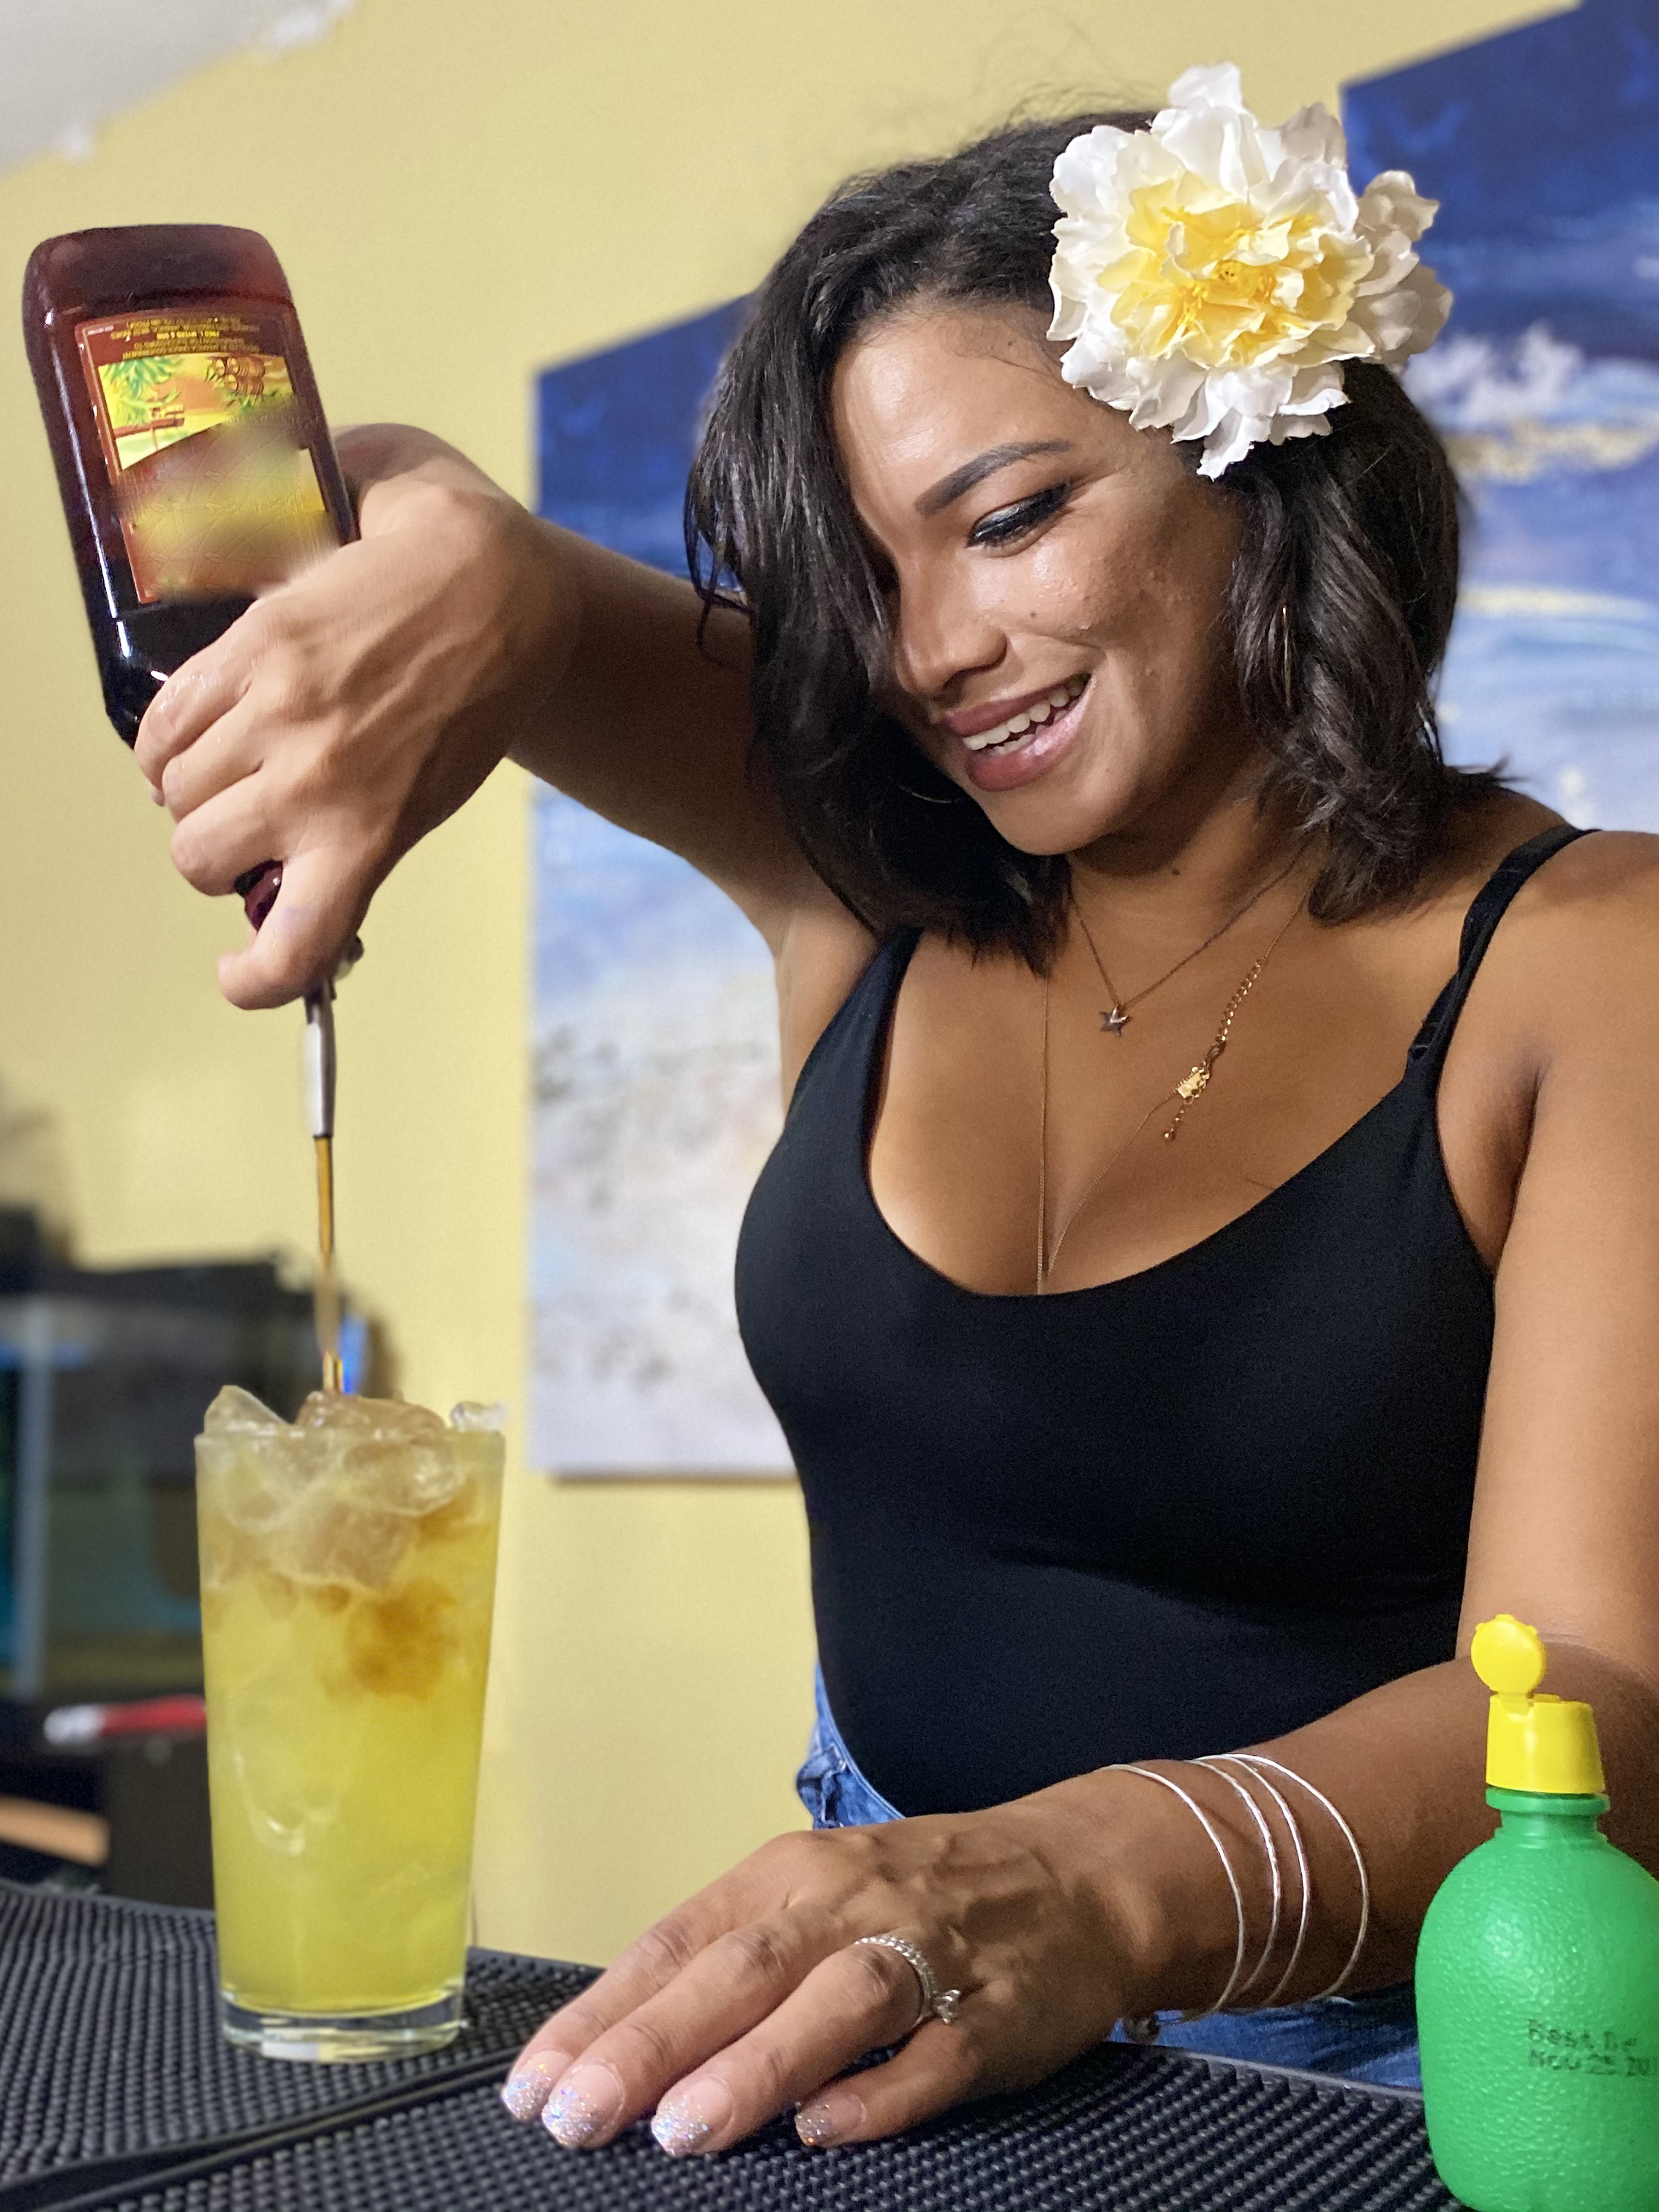 Paradise bartender the DiscoverNet